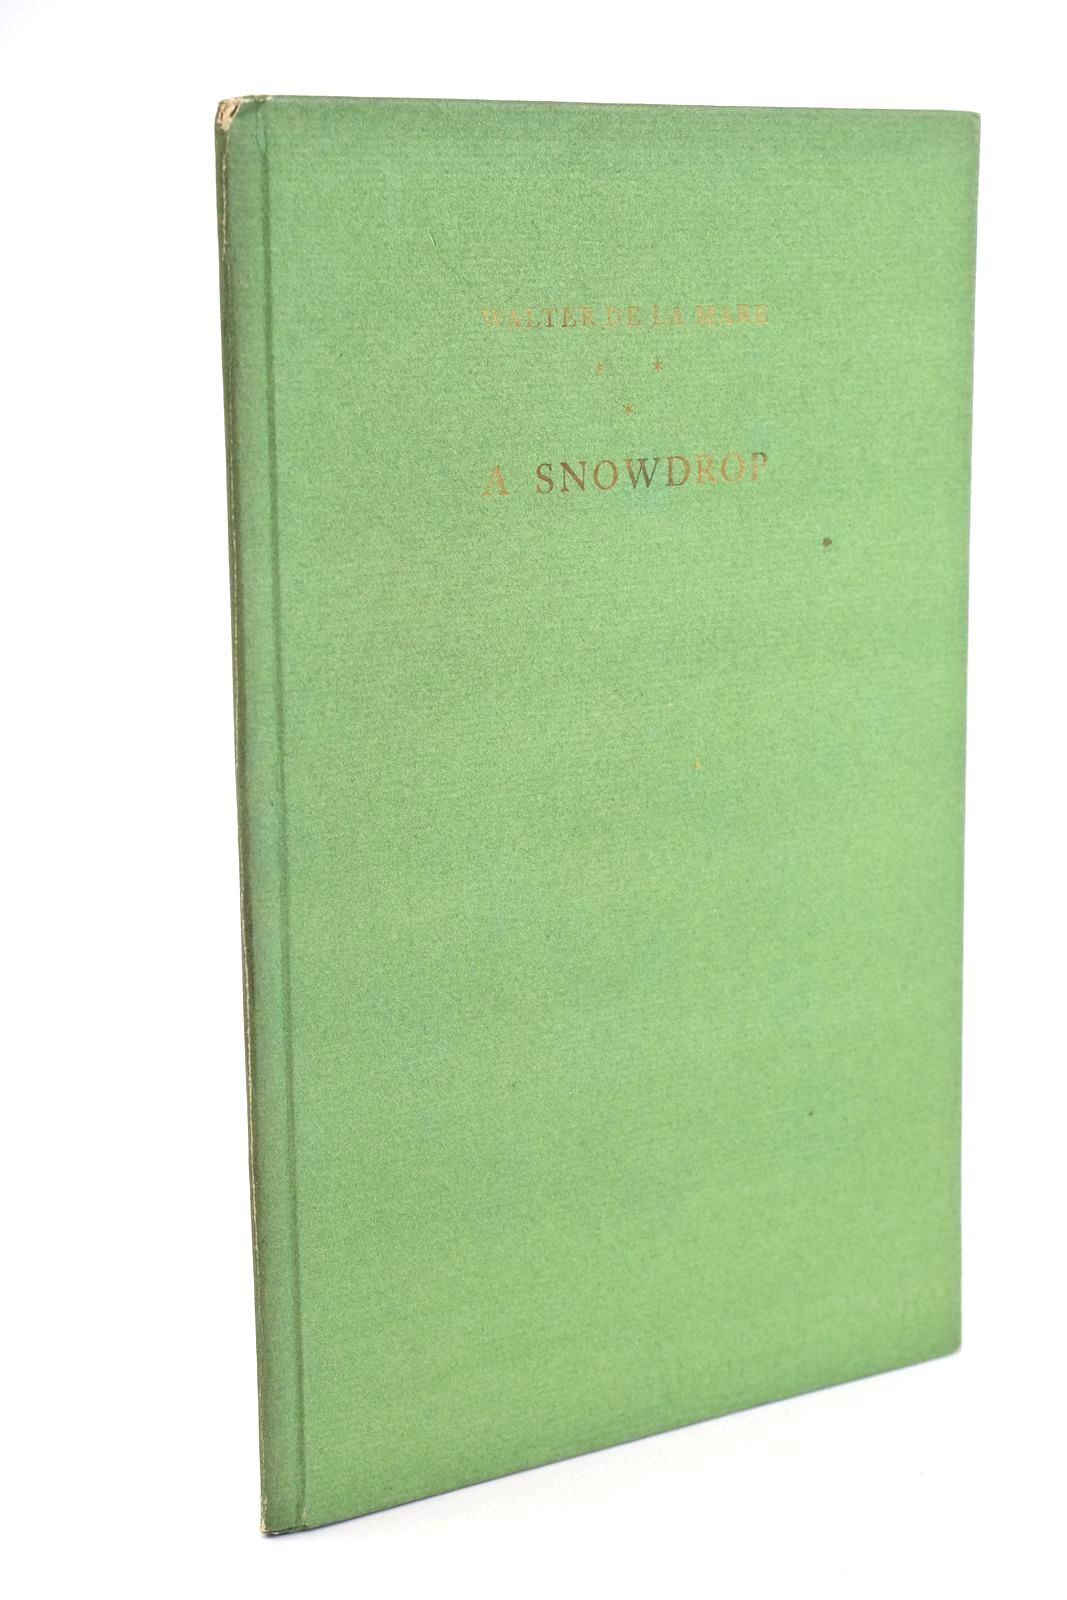 Photo of A SNOWDROP written by De La Mare, Walter illustrated by Guercio, Claudia published by Faber &amp; Faber Limited (STOCK CODE: 1323711)  for sale by Stella & Rose's Books